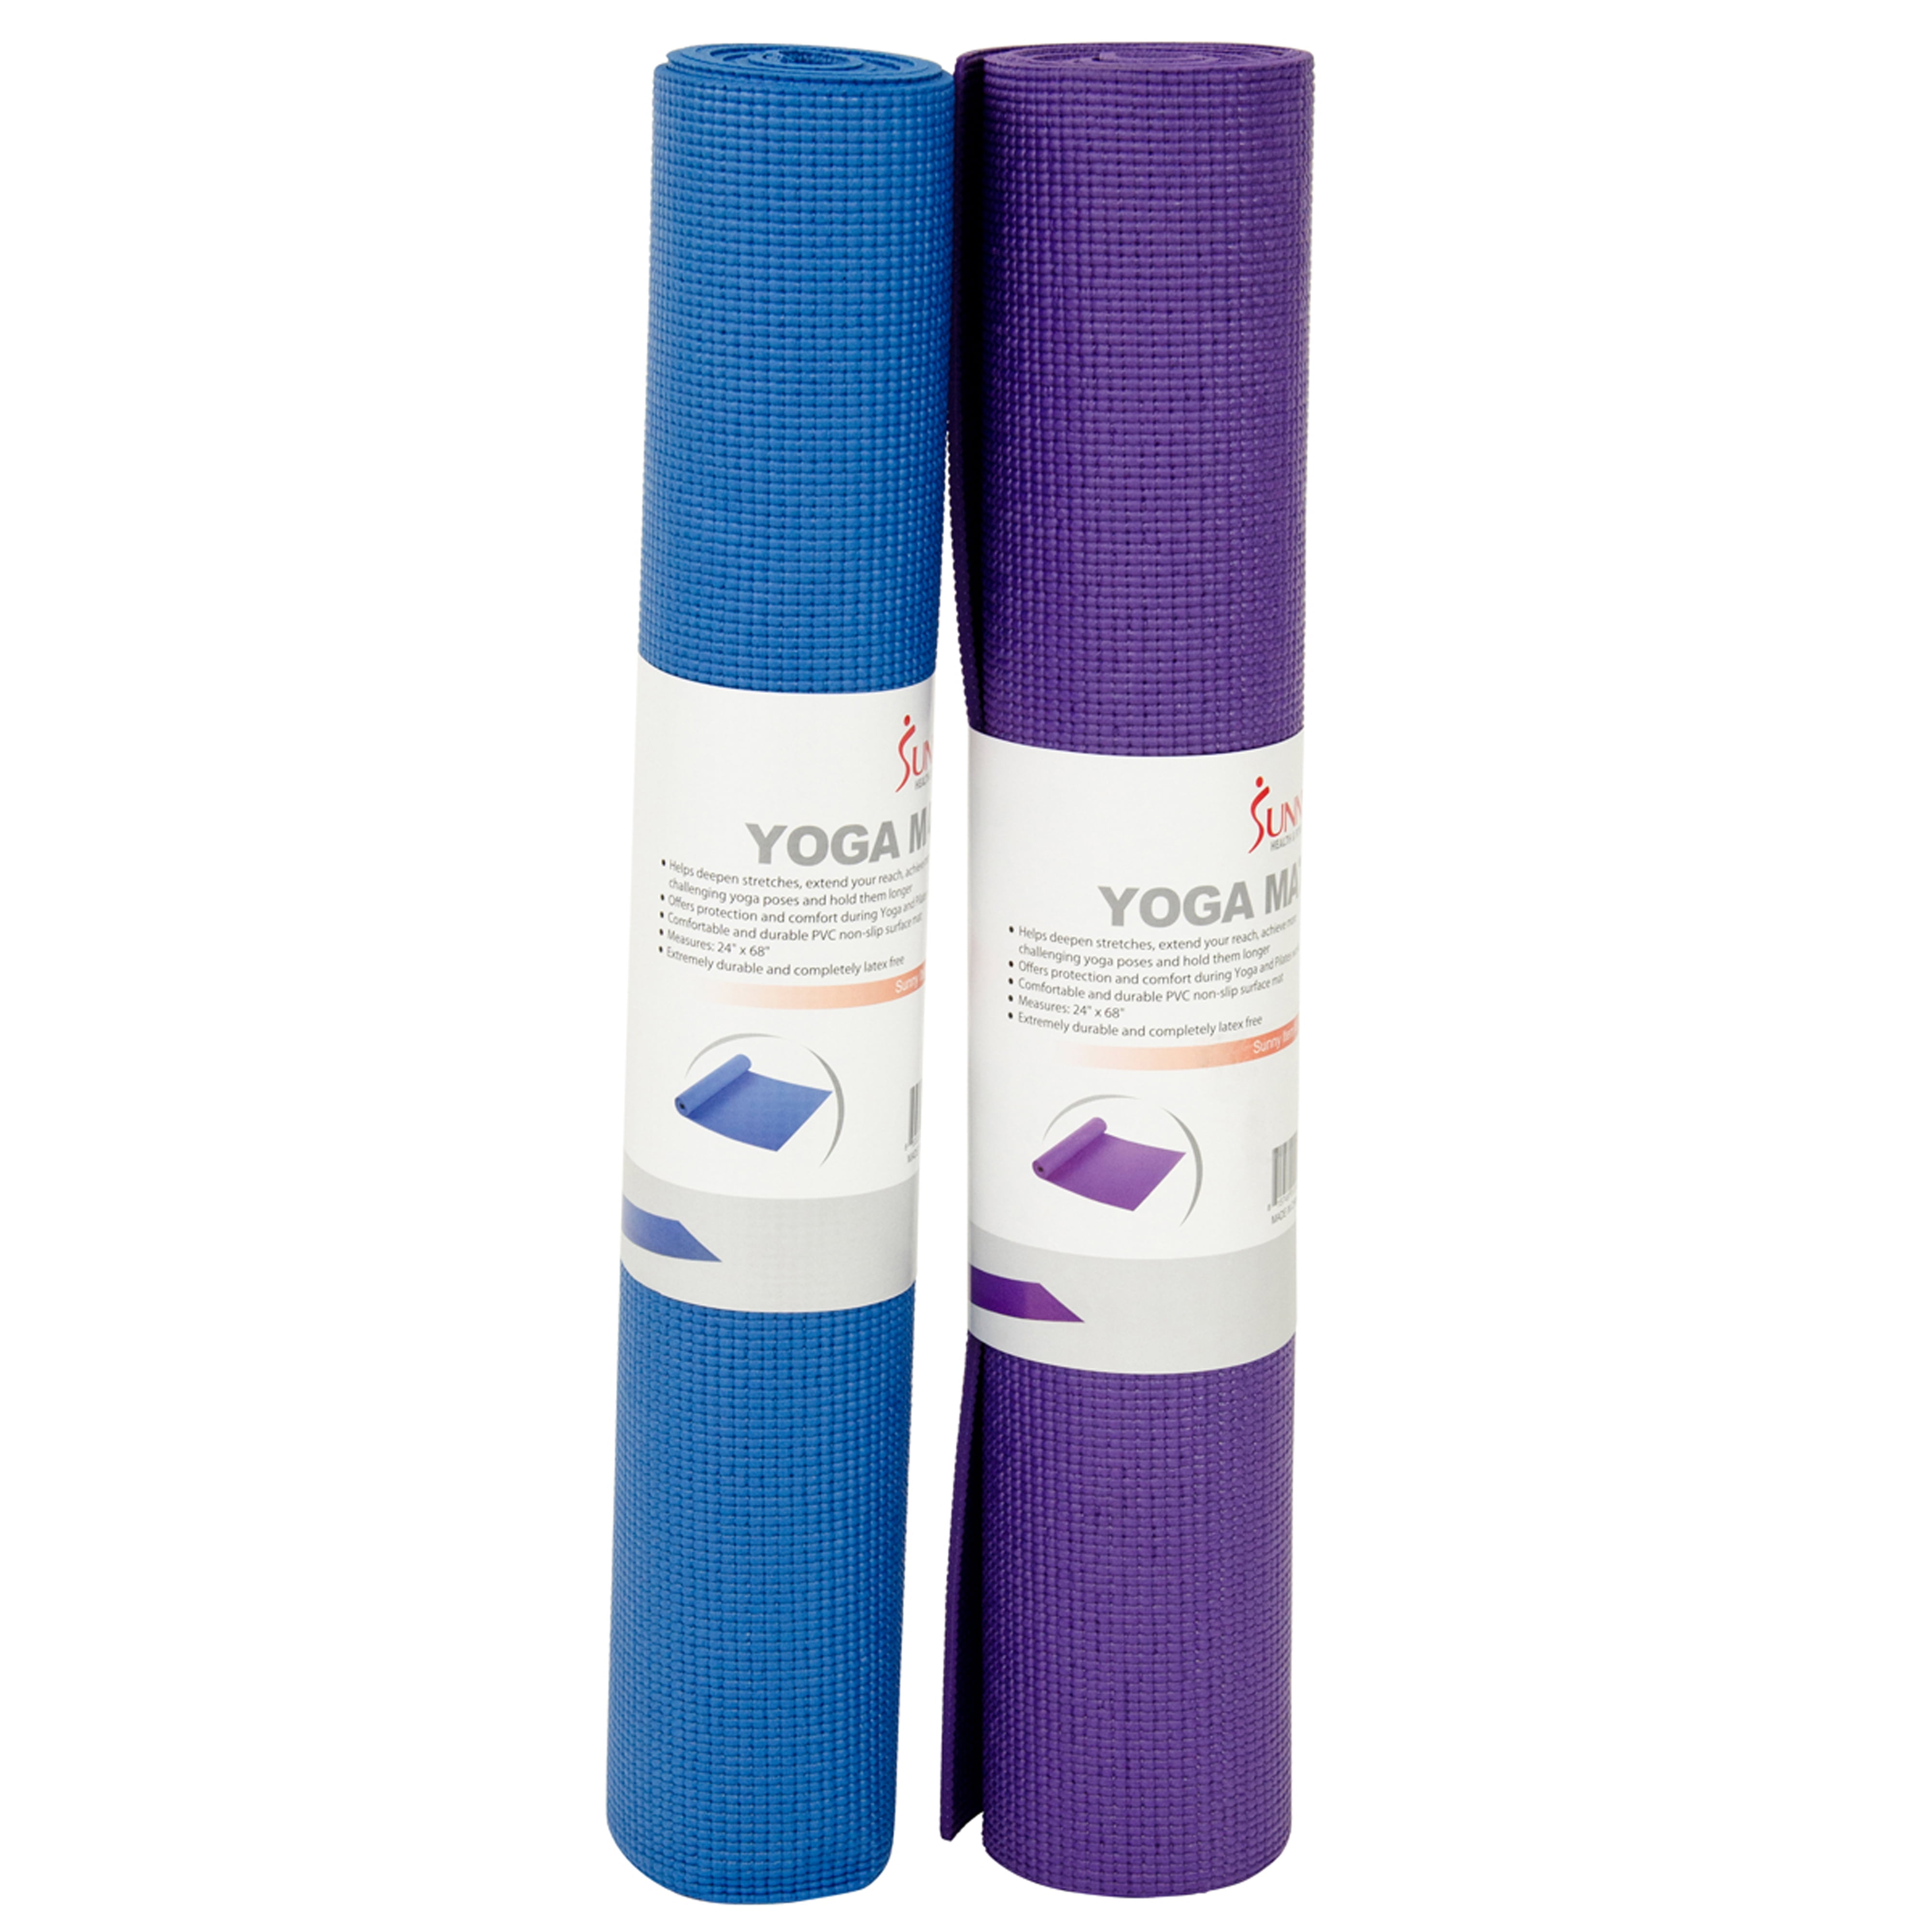 GymShop Extra Thick Yoga Mat Purple